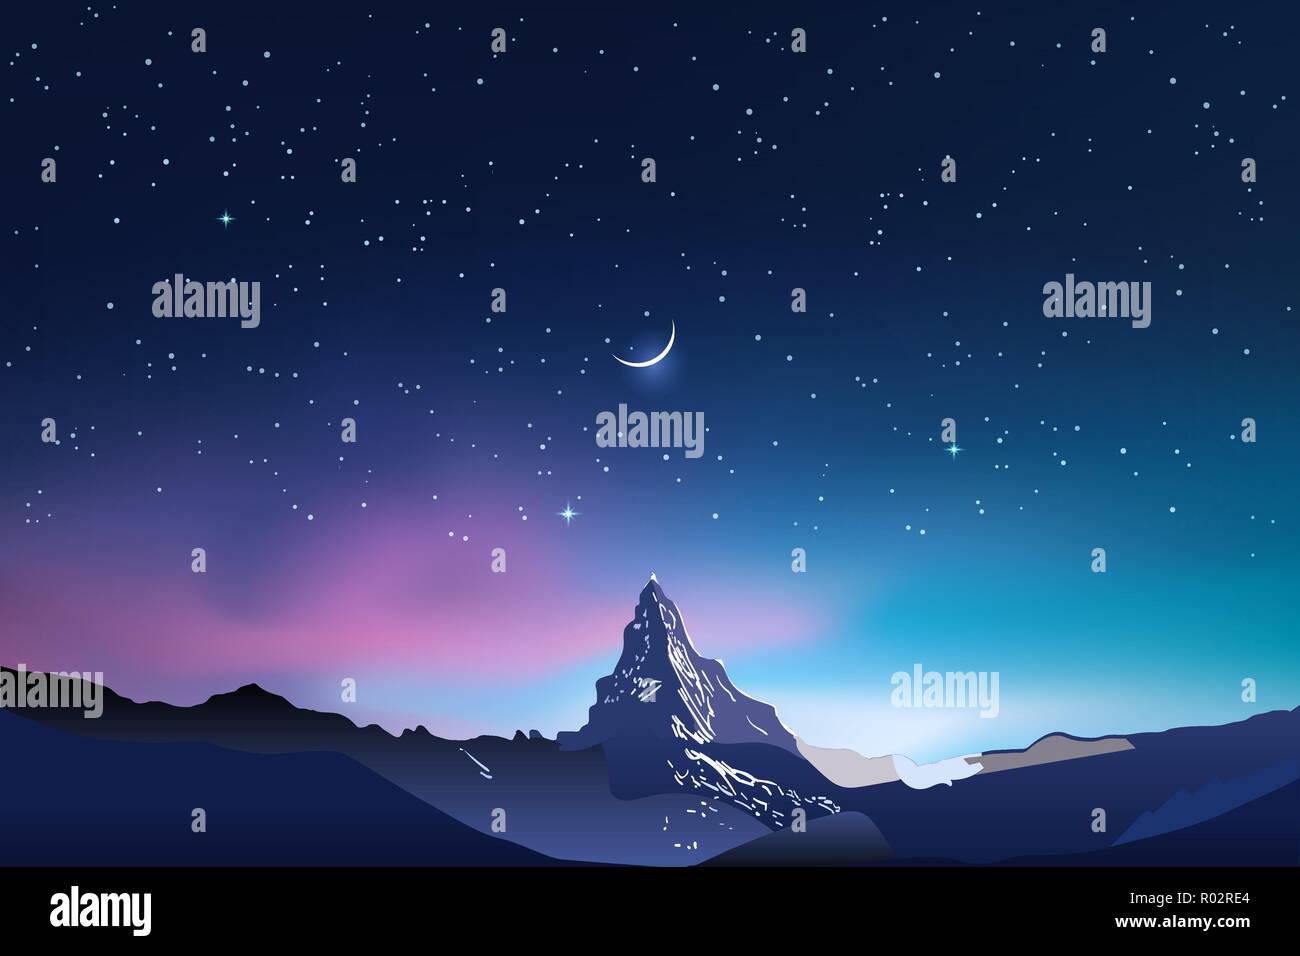 Snowy mountains, pink and blue night sky landscape with stars Stock Vector